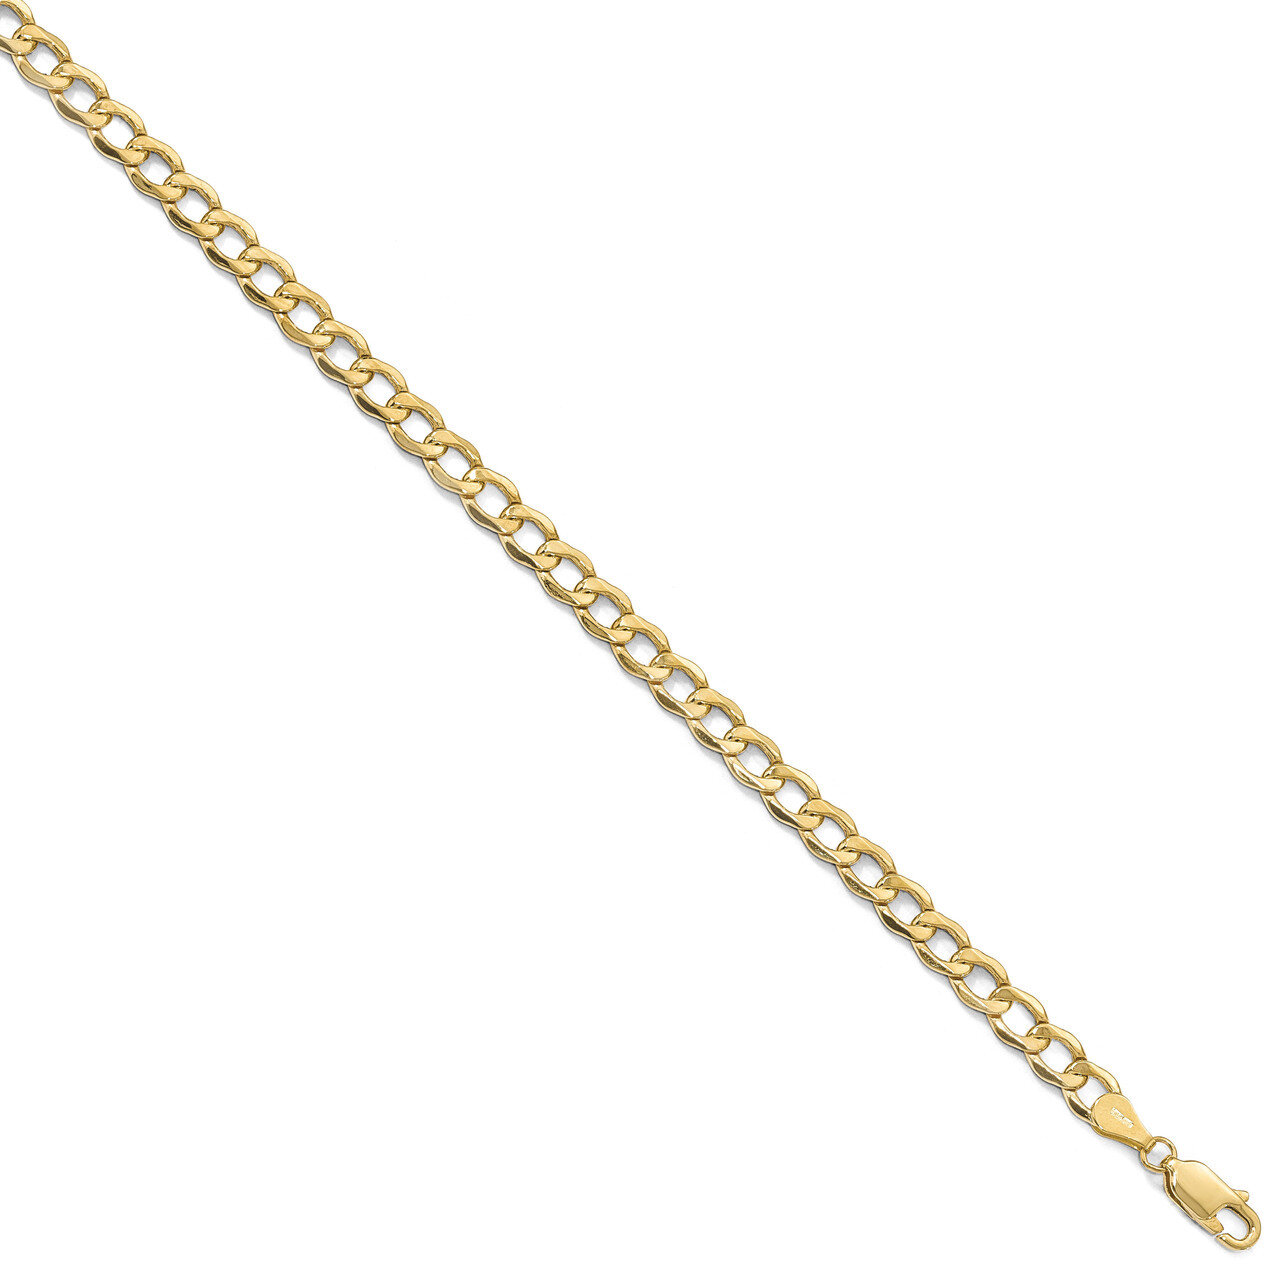 5.25mm Semi-Solid Curb Link Chain 20 Inch 10k Gold HB-8241-20